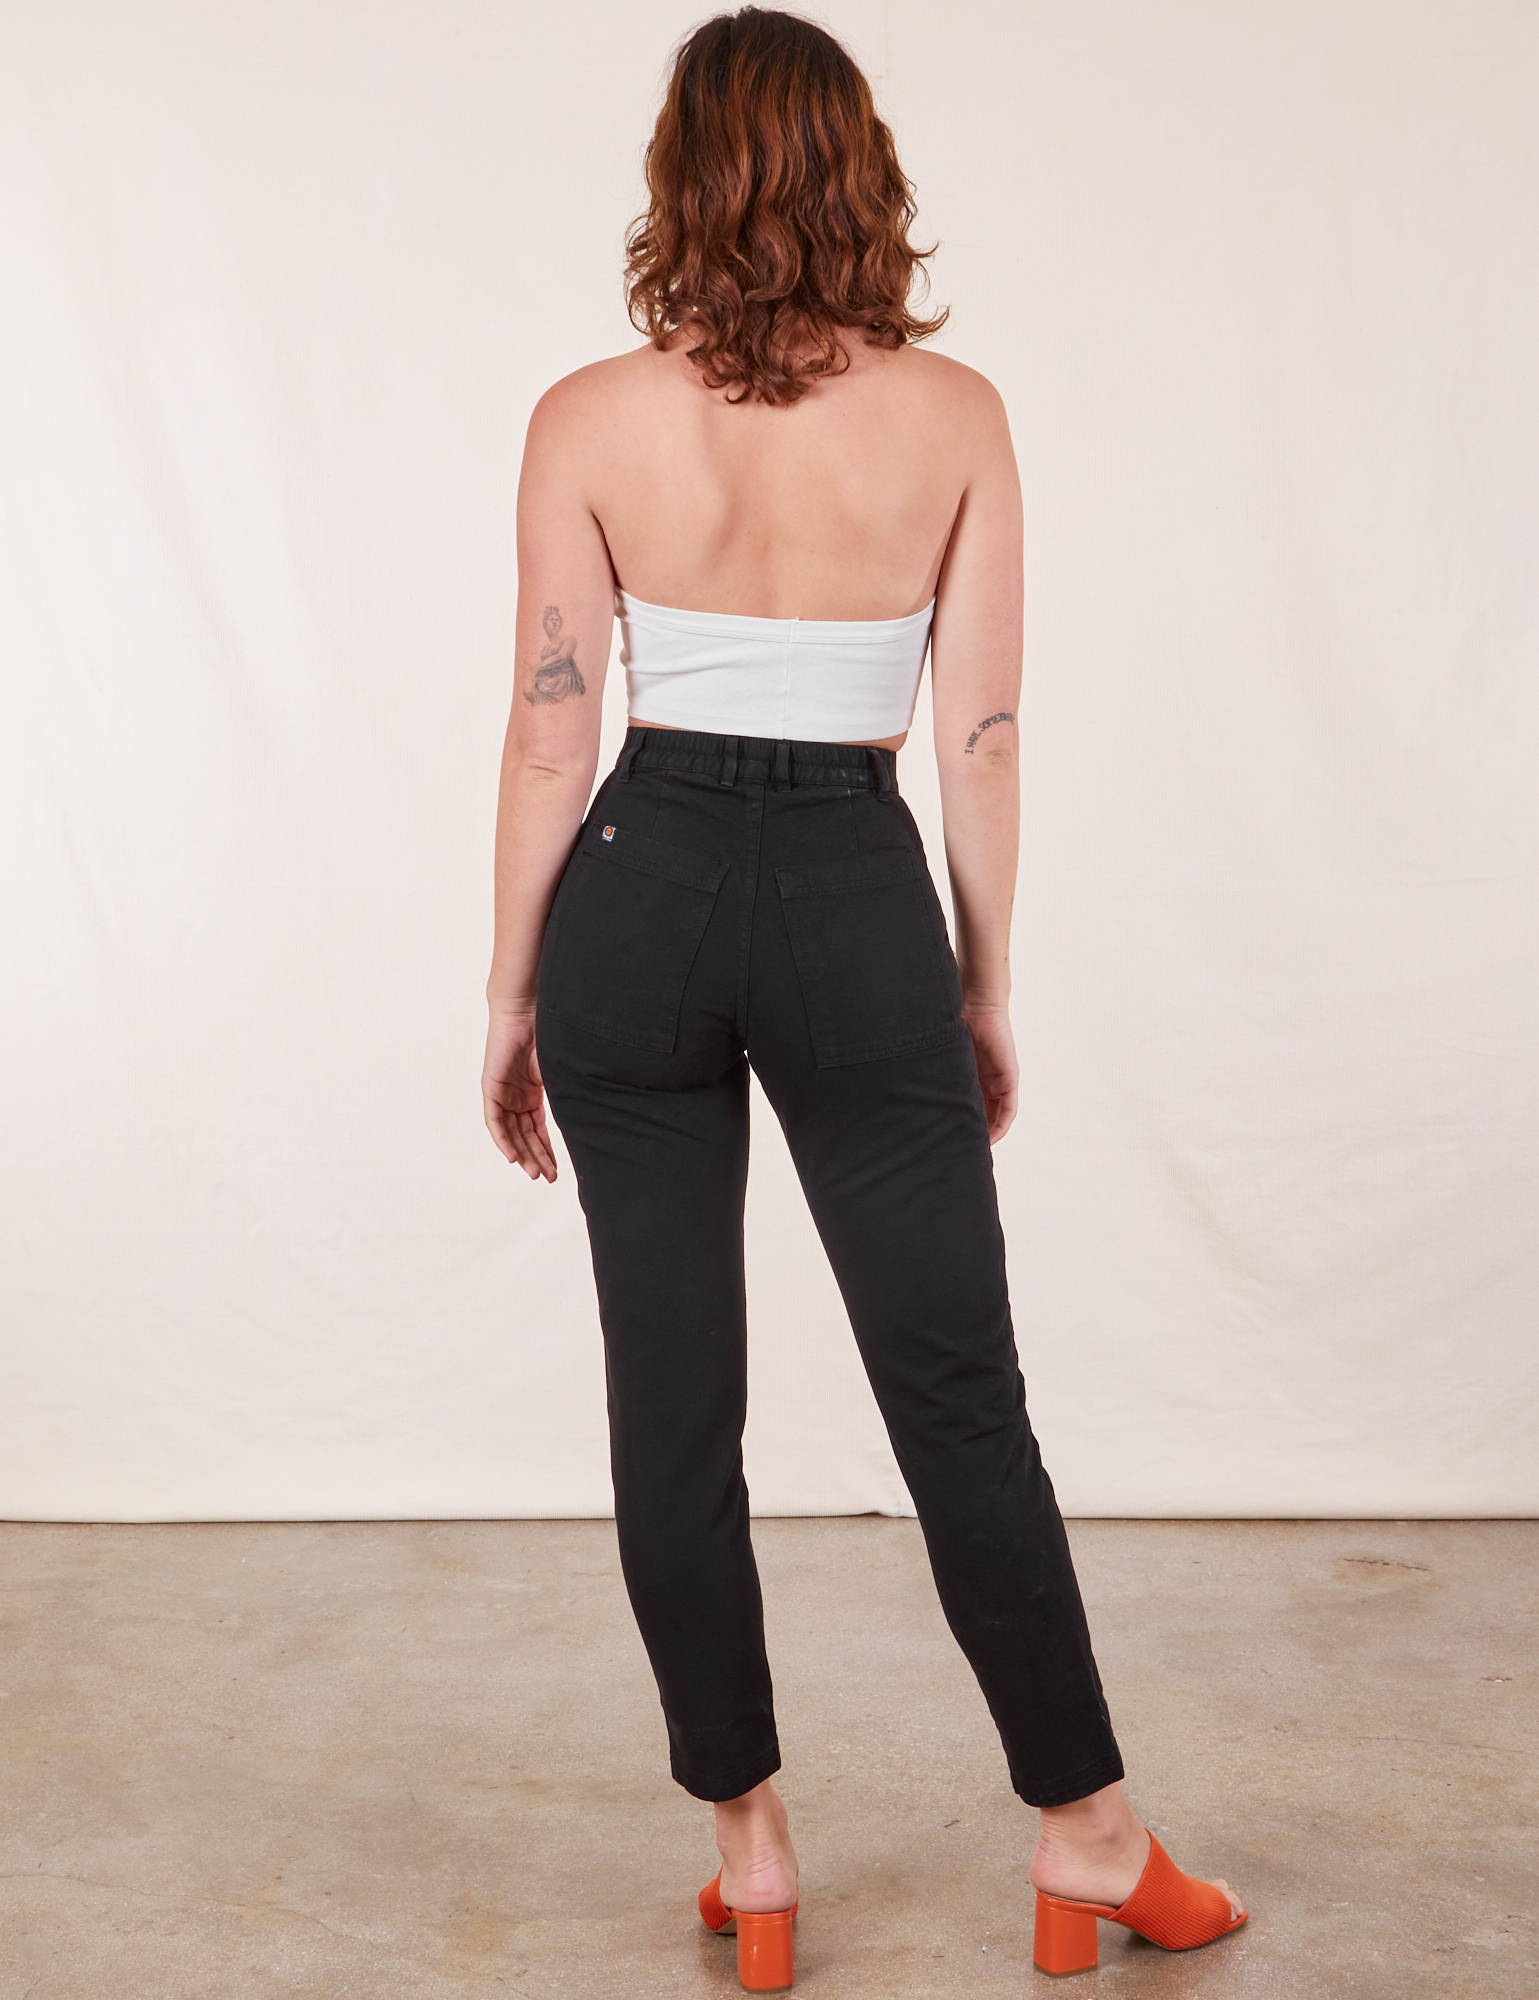 Back view of Pencil Pants in Basic Black and vintage off-white Halter Top on Alex